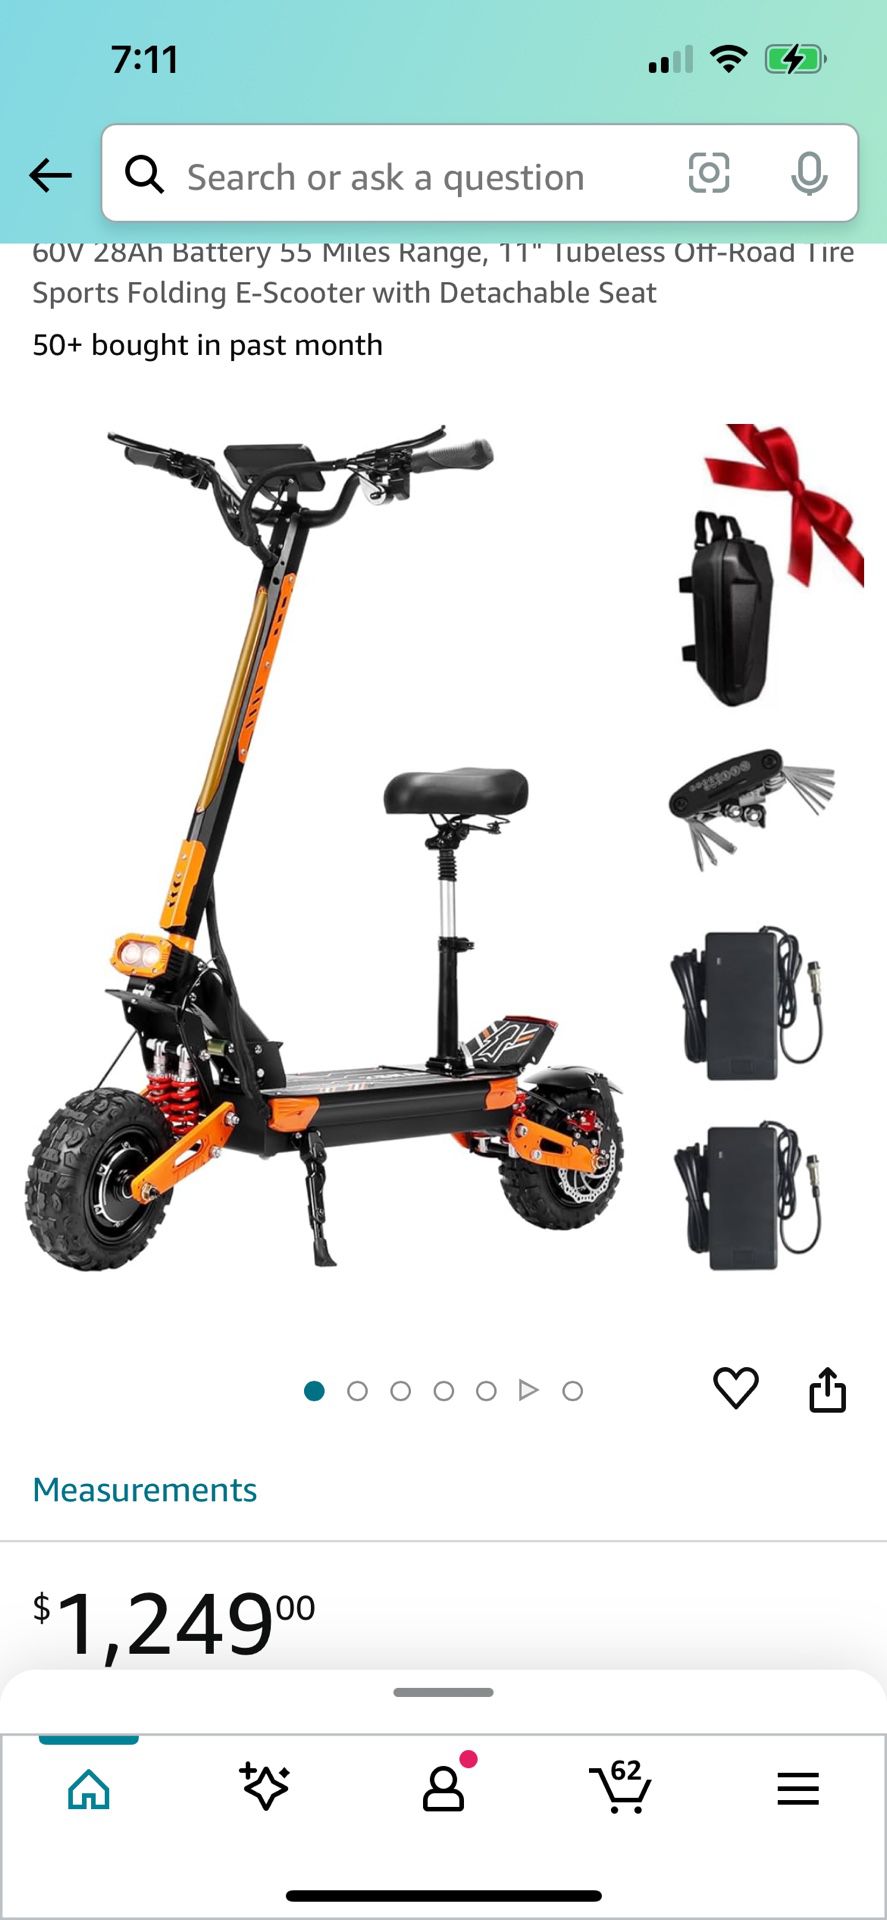 Electric Scooter for Adults Dual Motors 5600W Up to 50 MPH 60V 28Ah Battery 55 Miles Range, 11" Tubeless Off-Road Tire Sports Folding E-Scooter with D